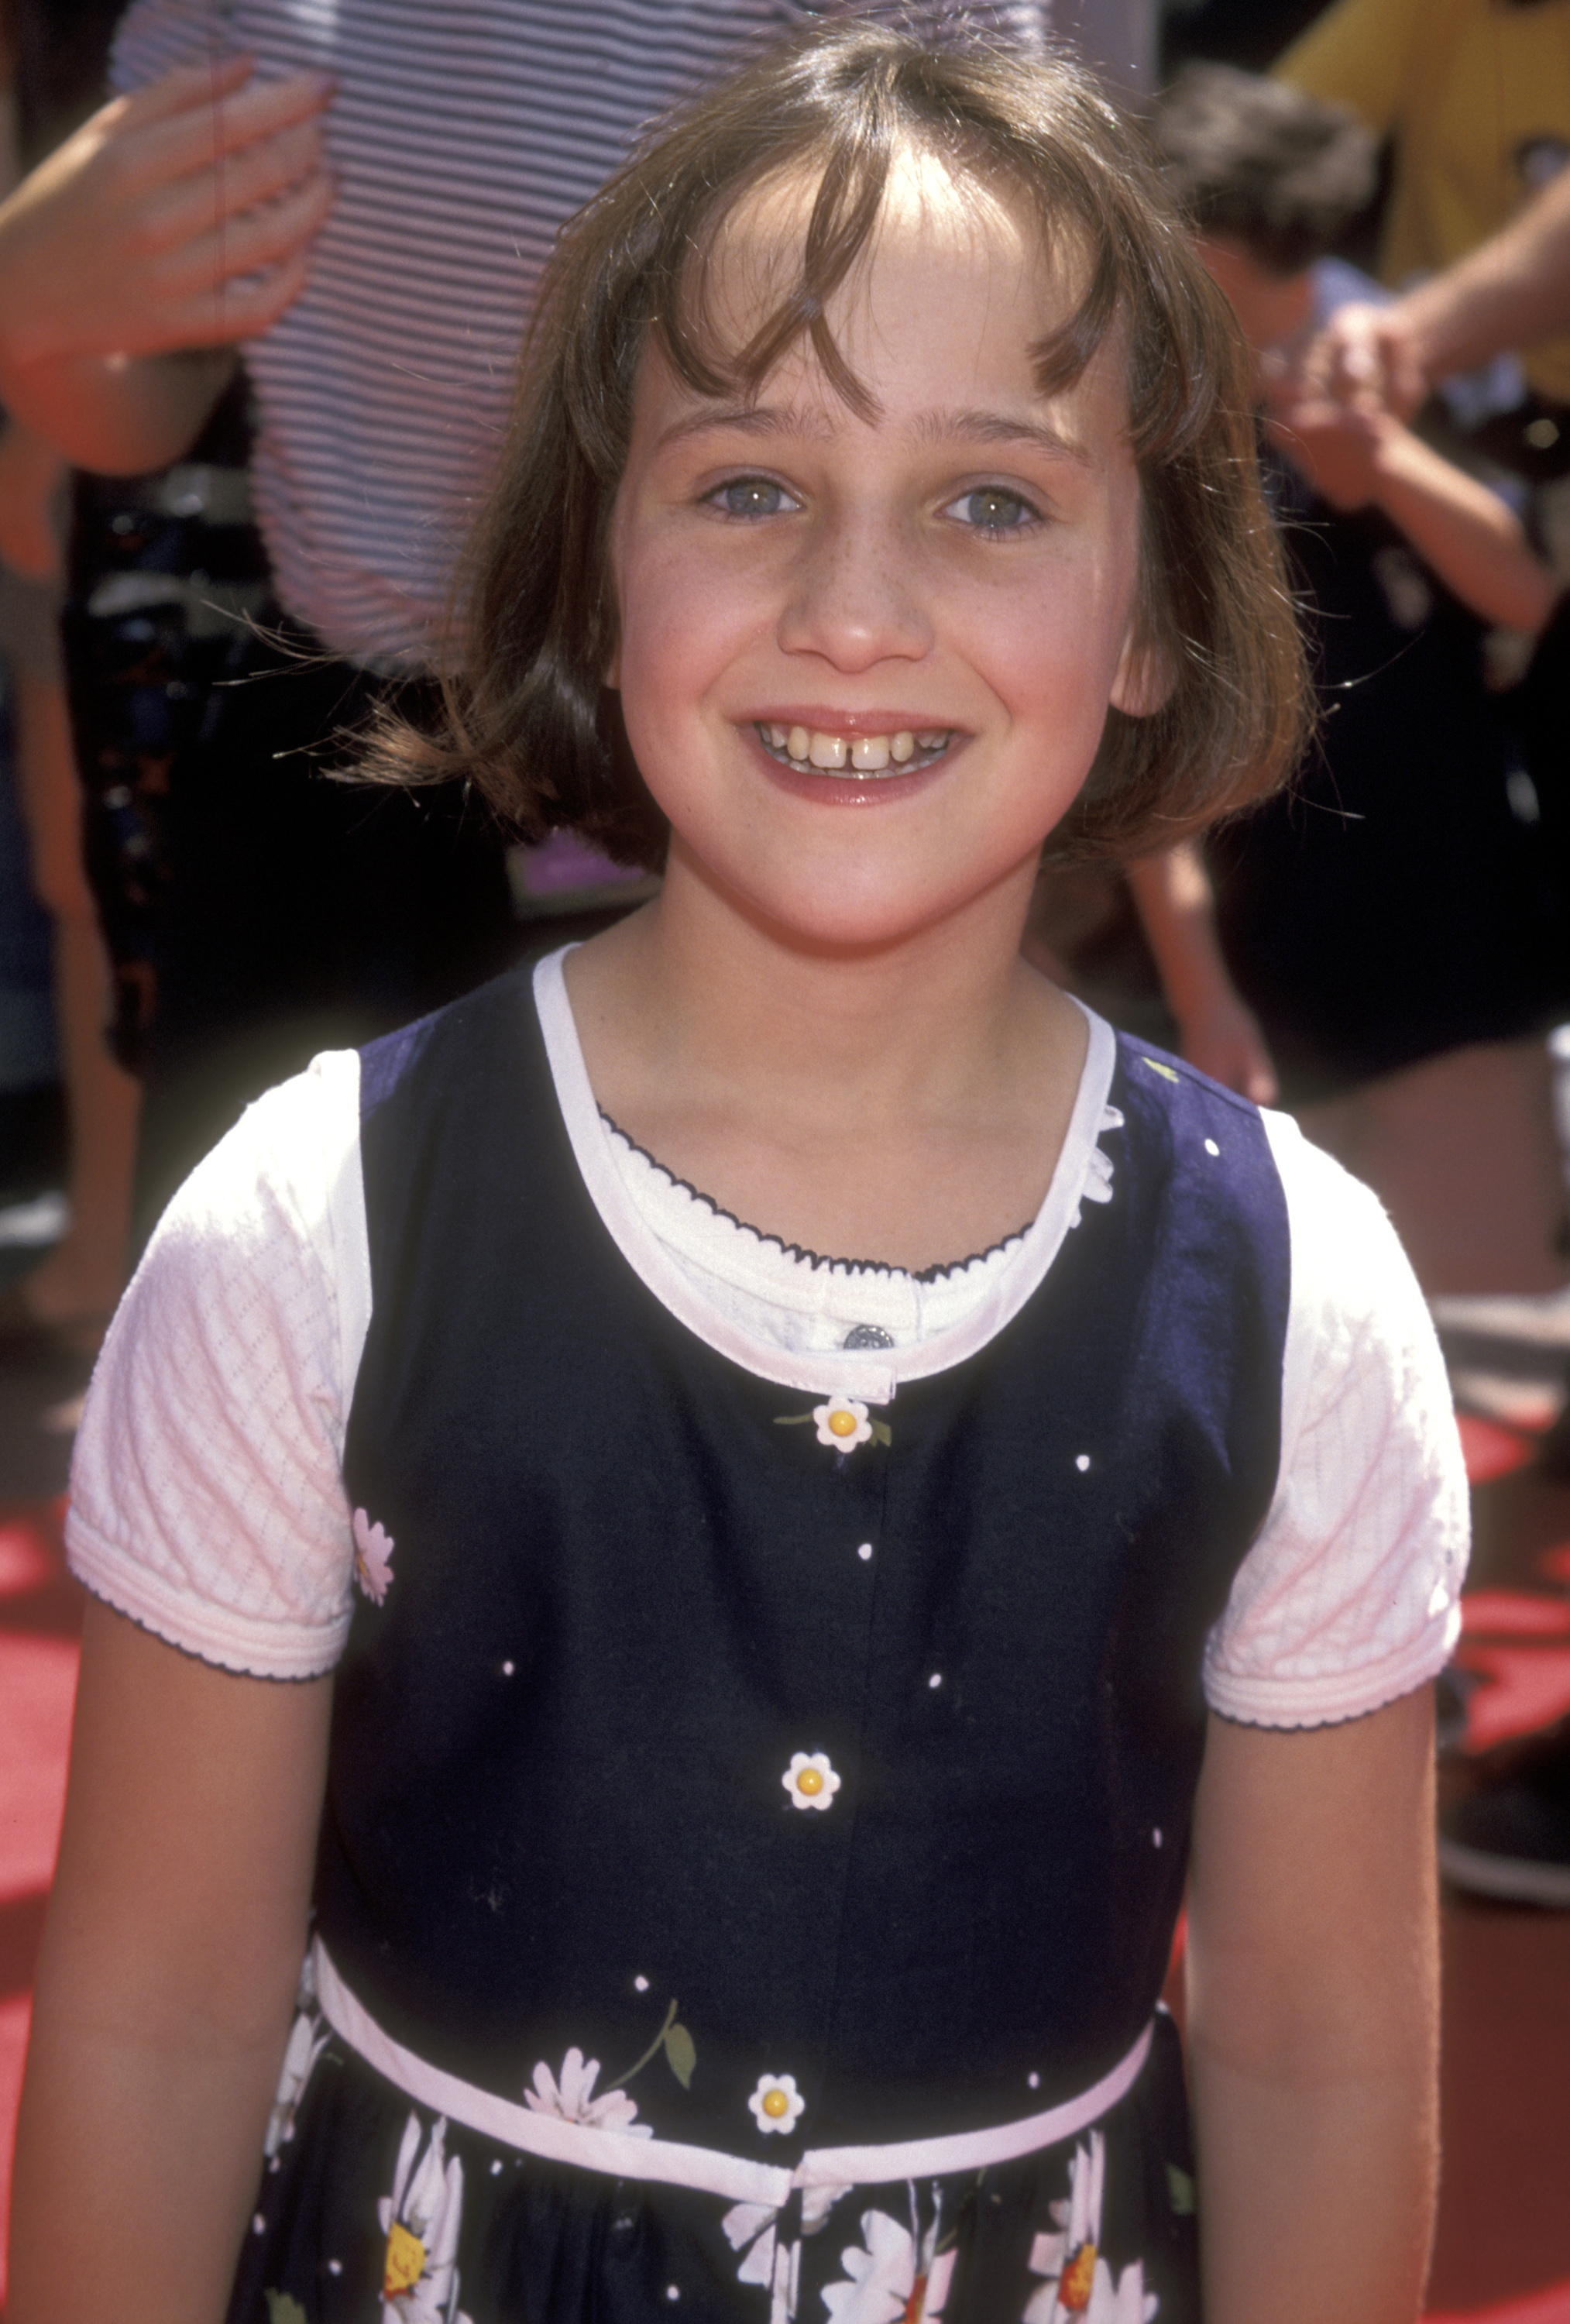 Mara Wilson attends Universal City premiere of "A Simple Wish," 1997 | Source: Getty Images